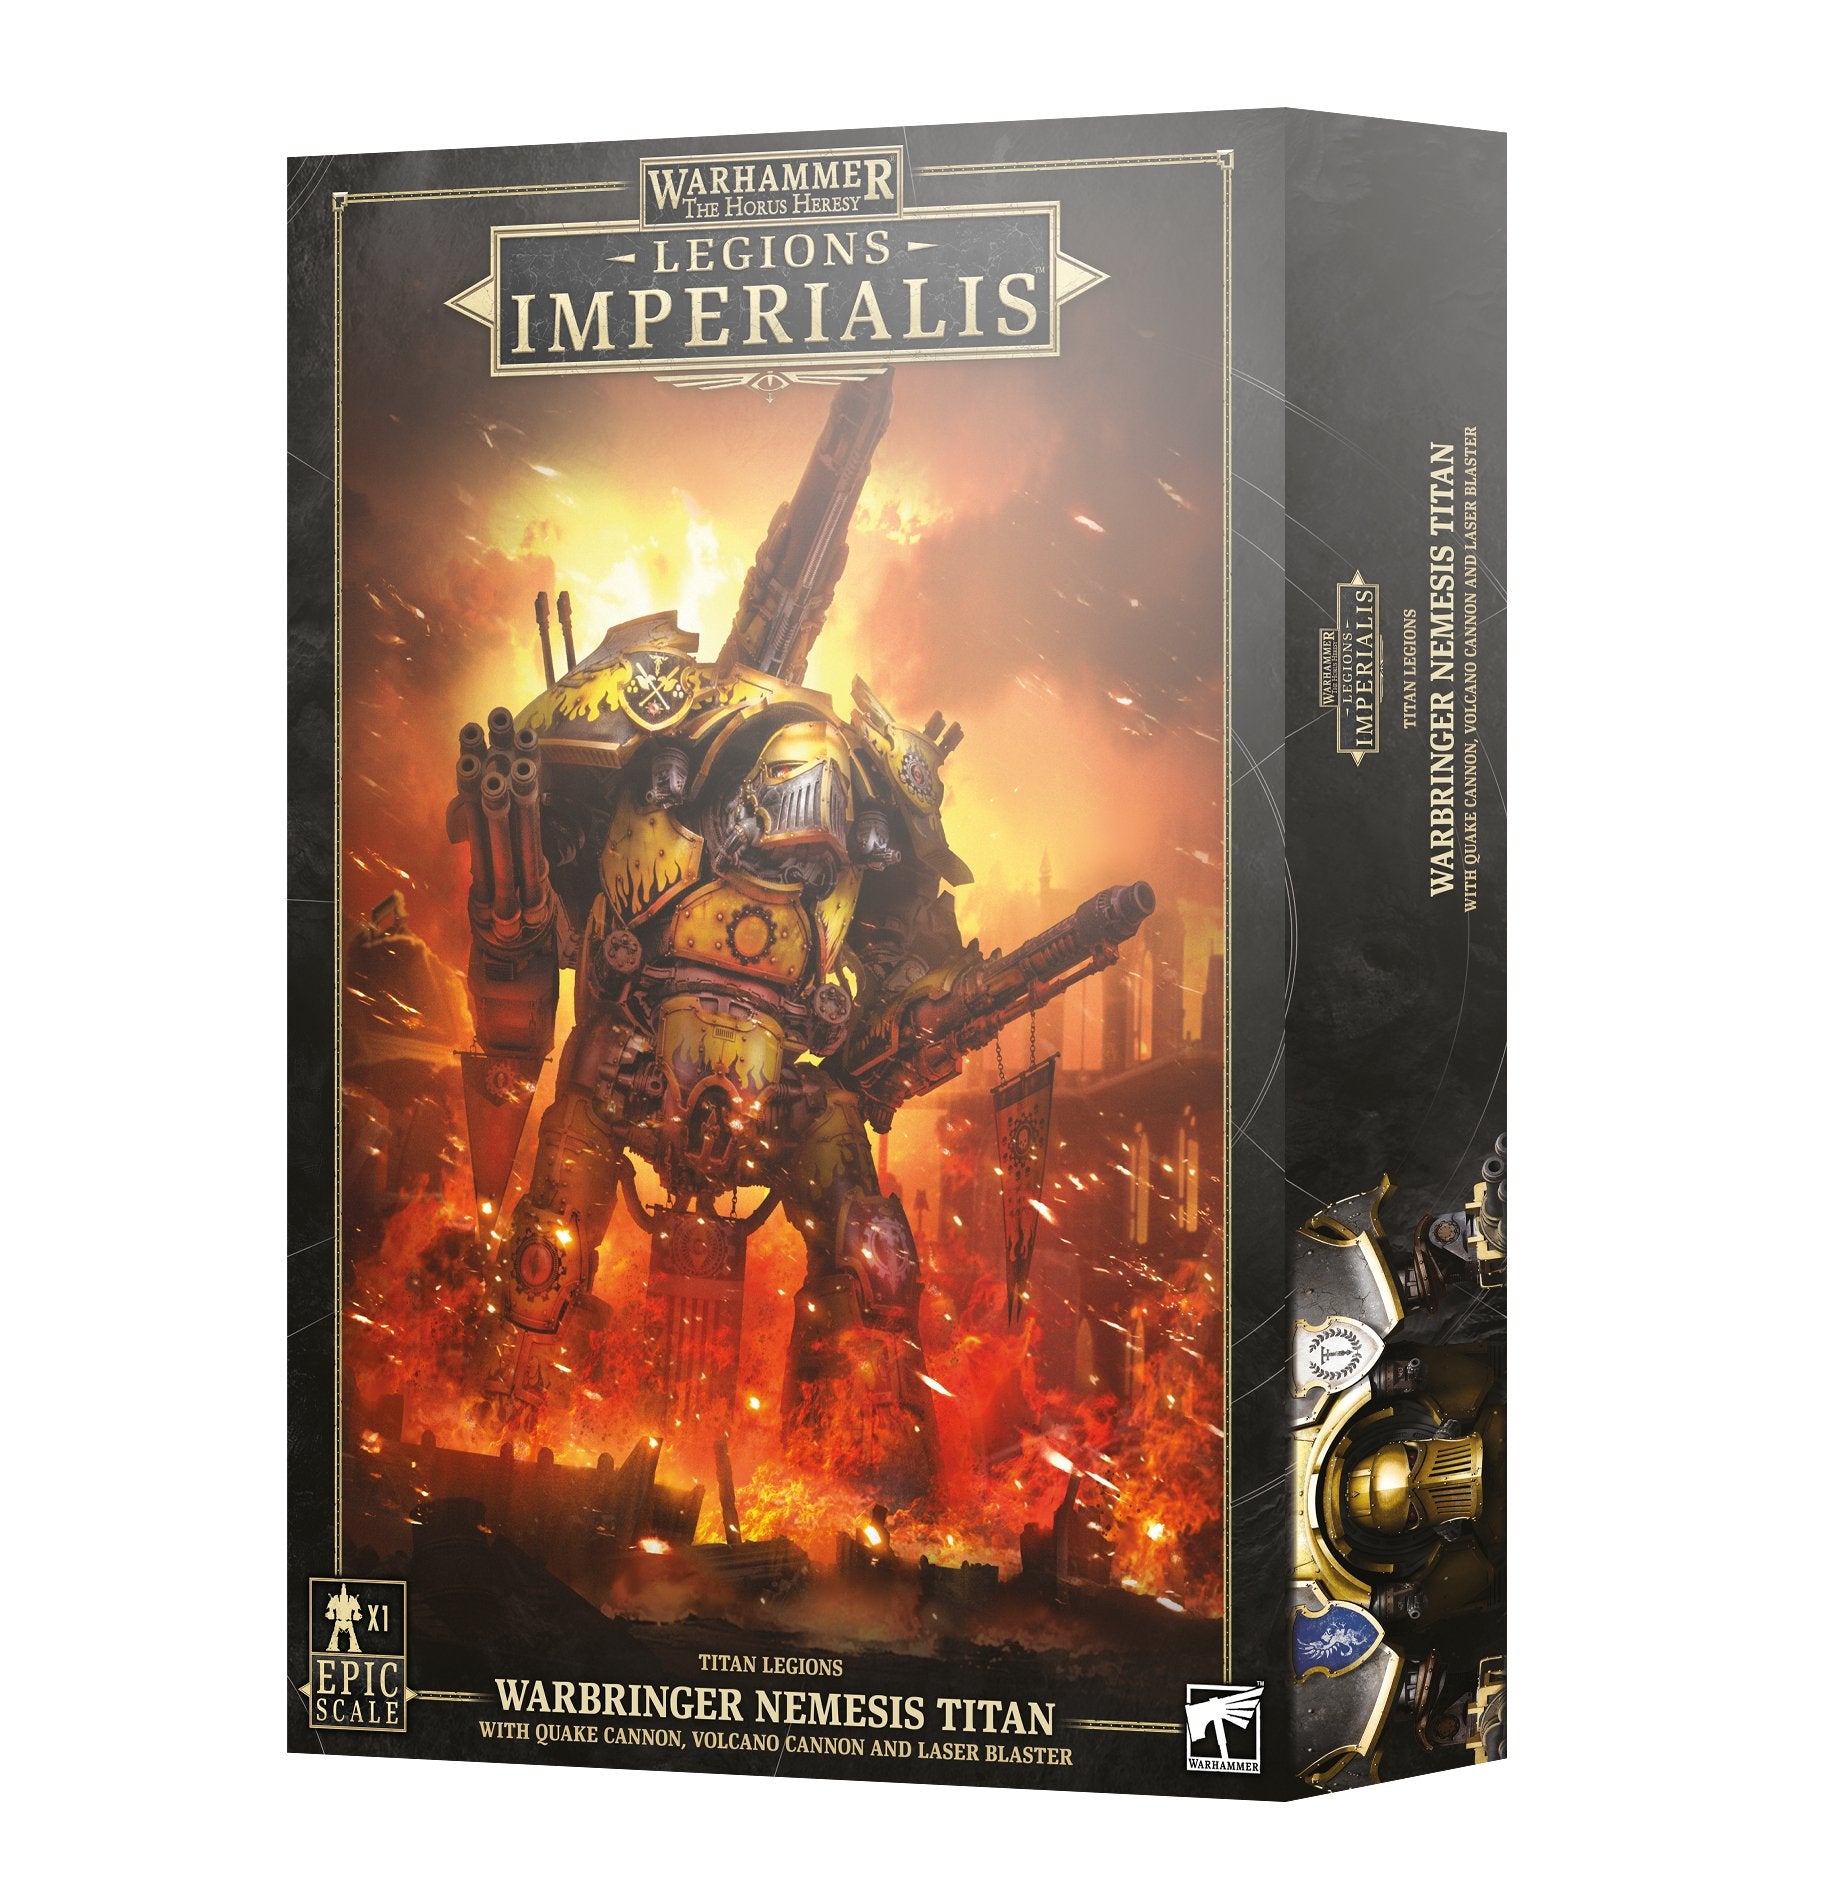 Legions Imperialis: Warbringer Nemesis Titan with Quake Cannon - Release Date 13/4/24 - Loaded Dice